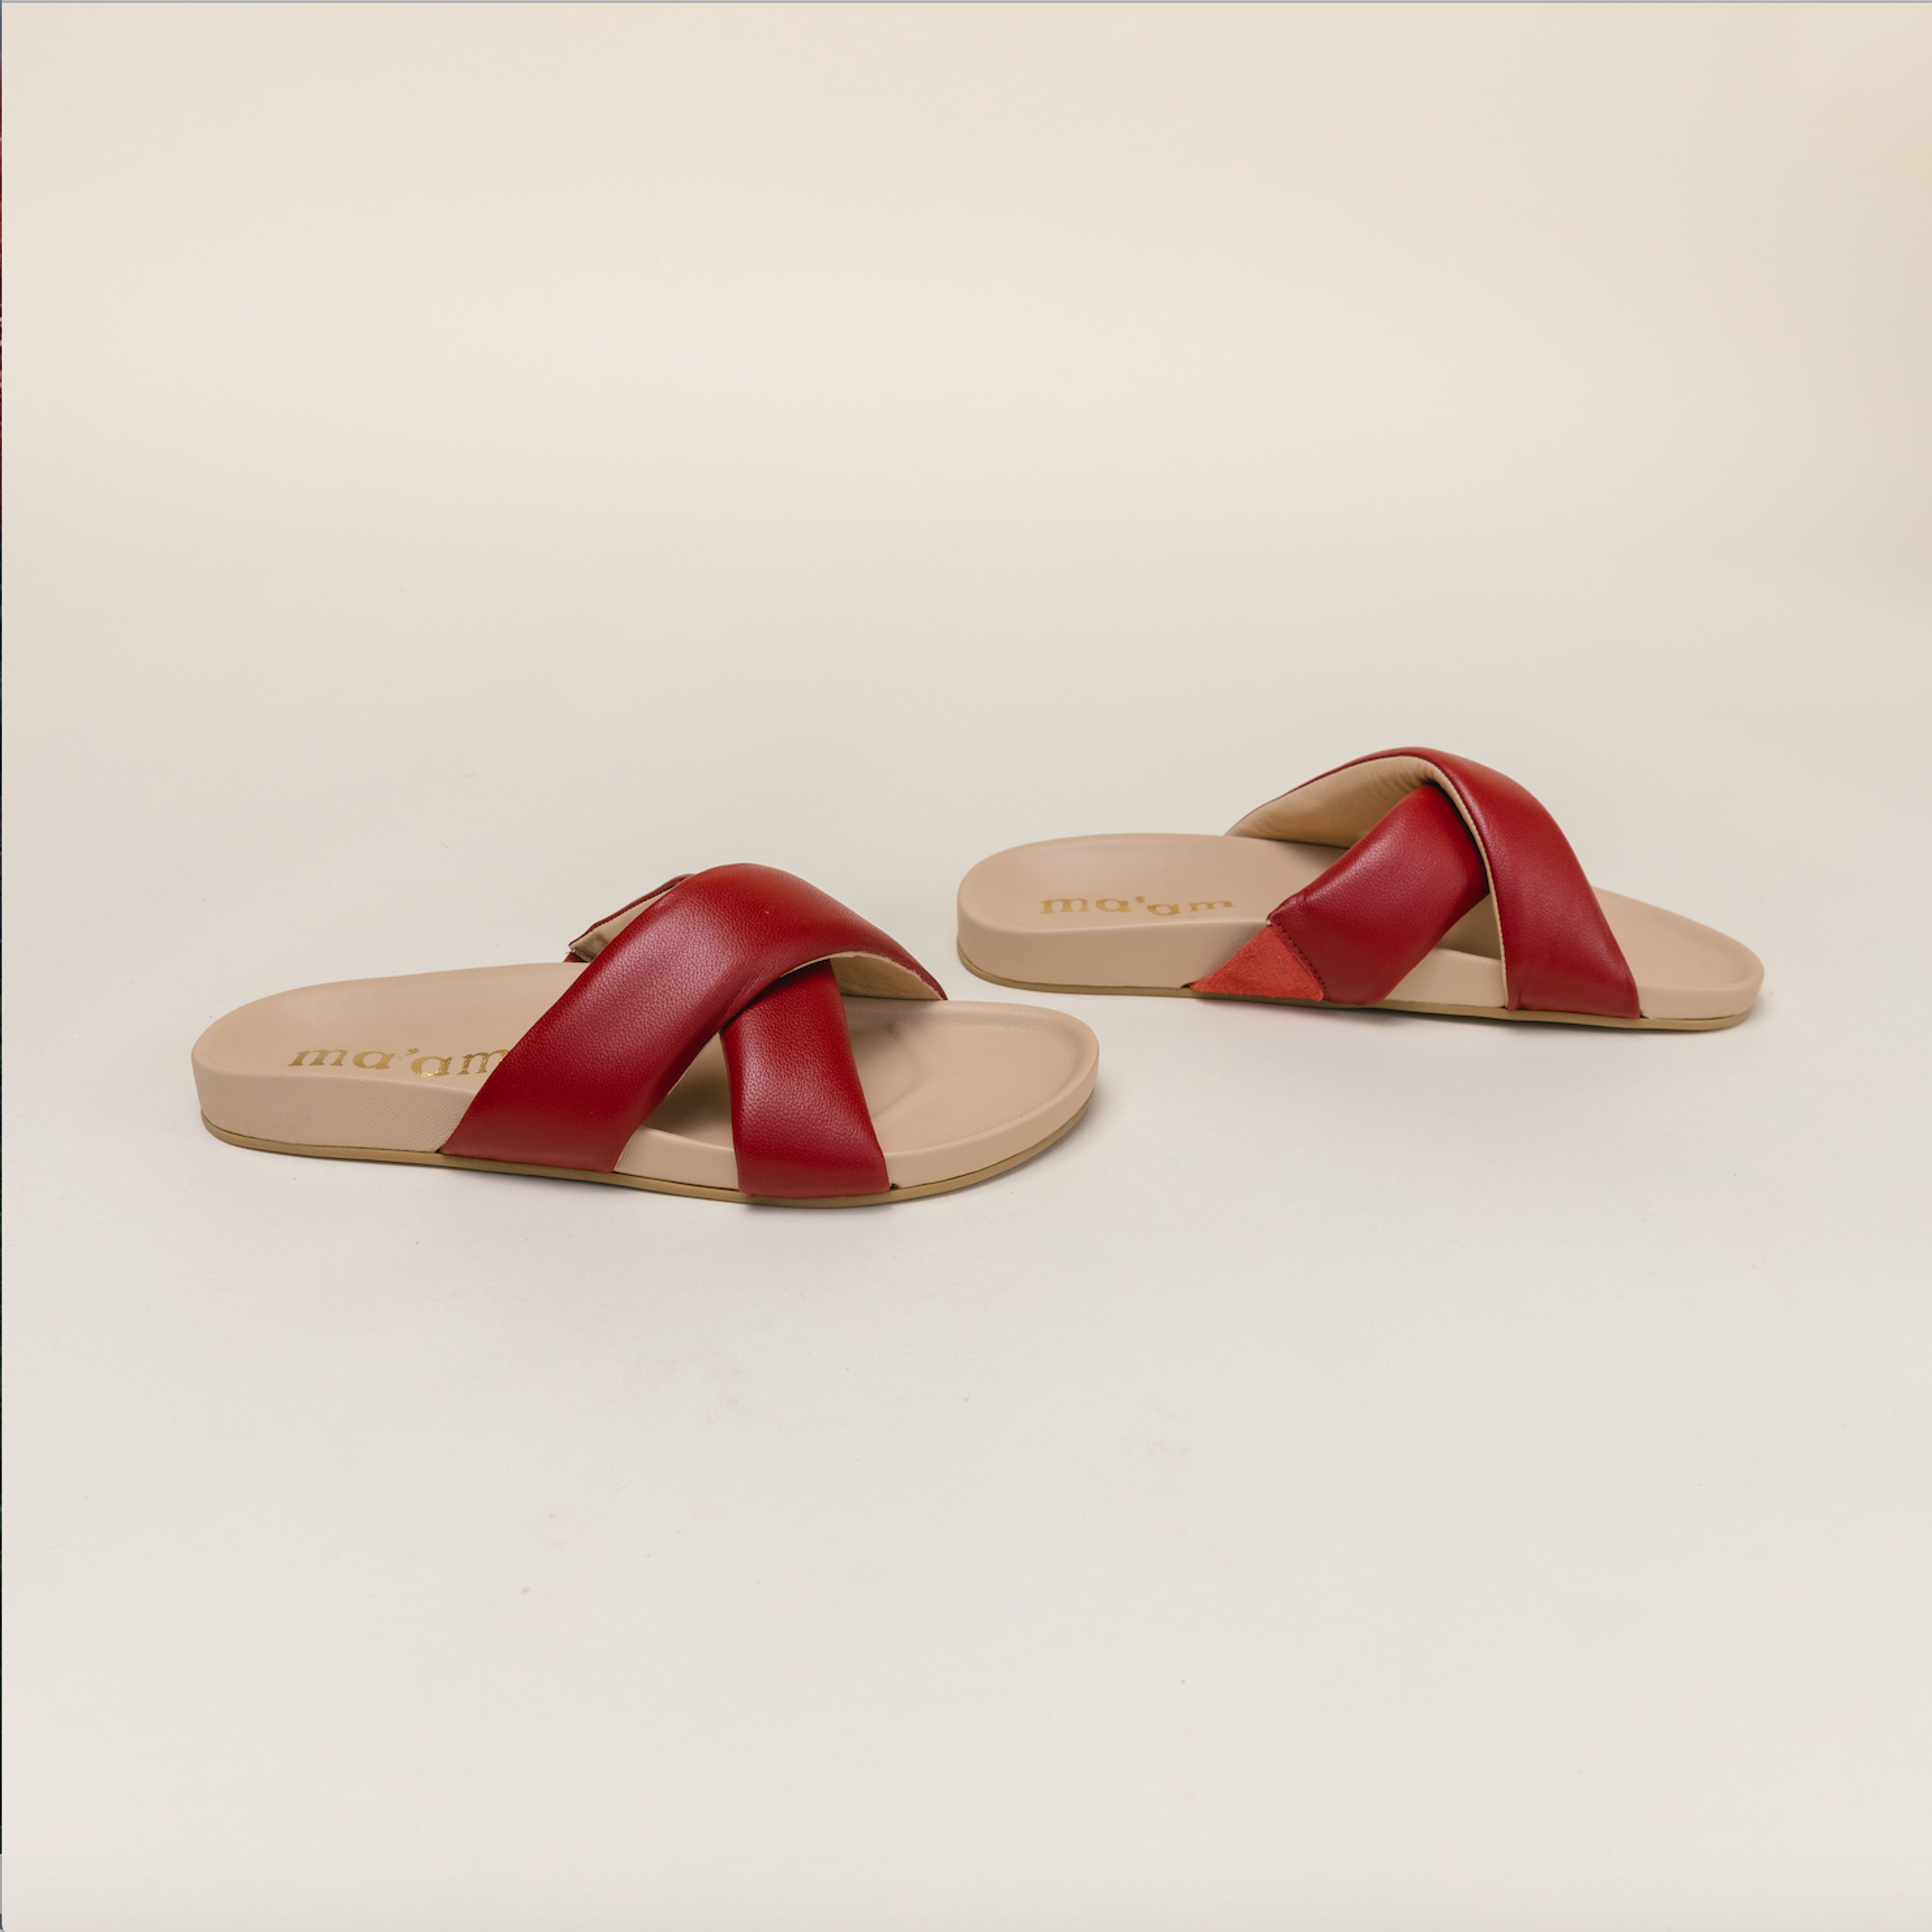 Dolly Sandals - Negroni